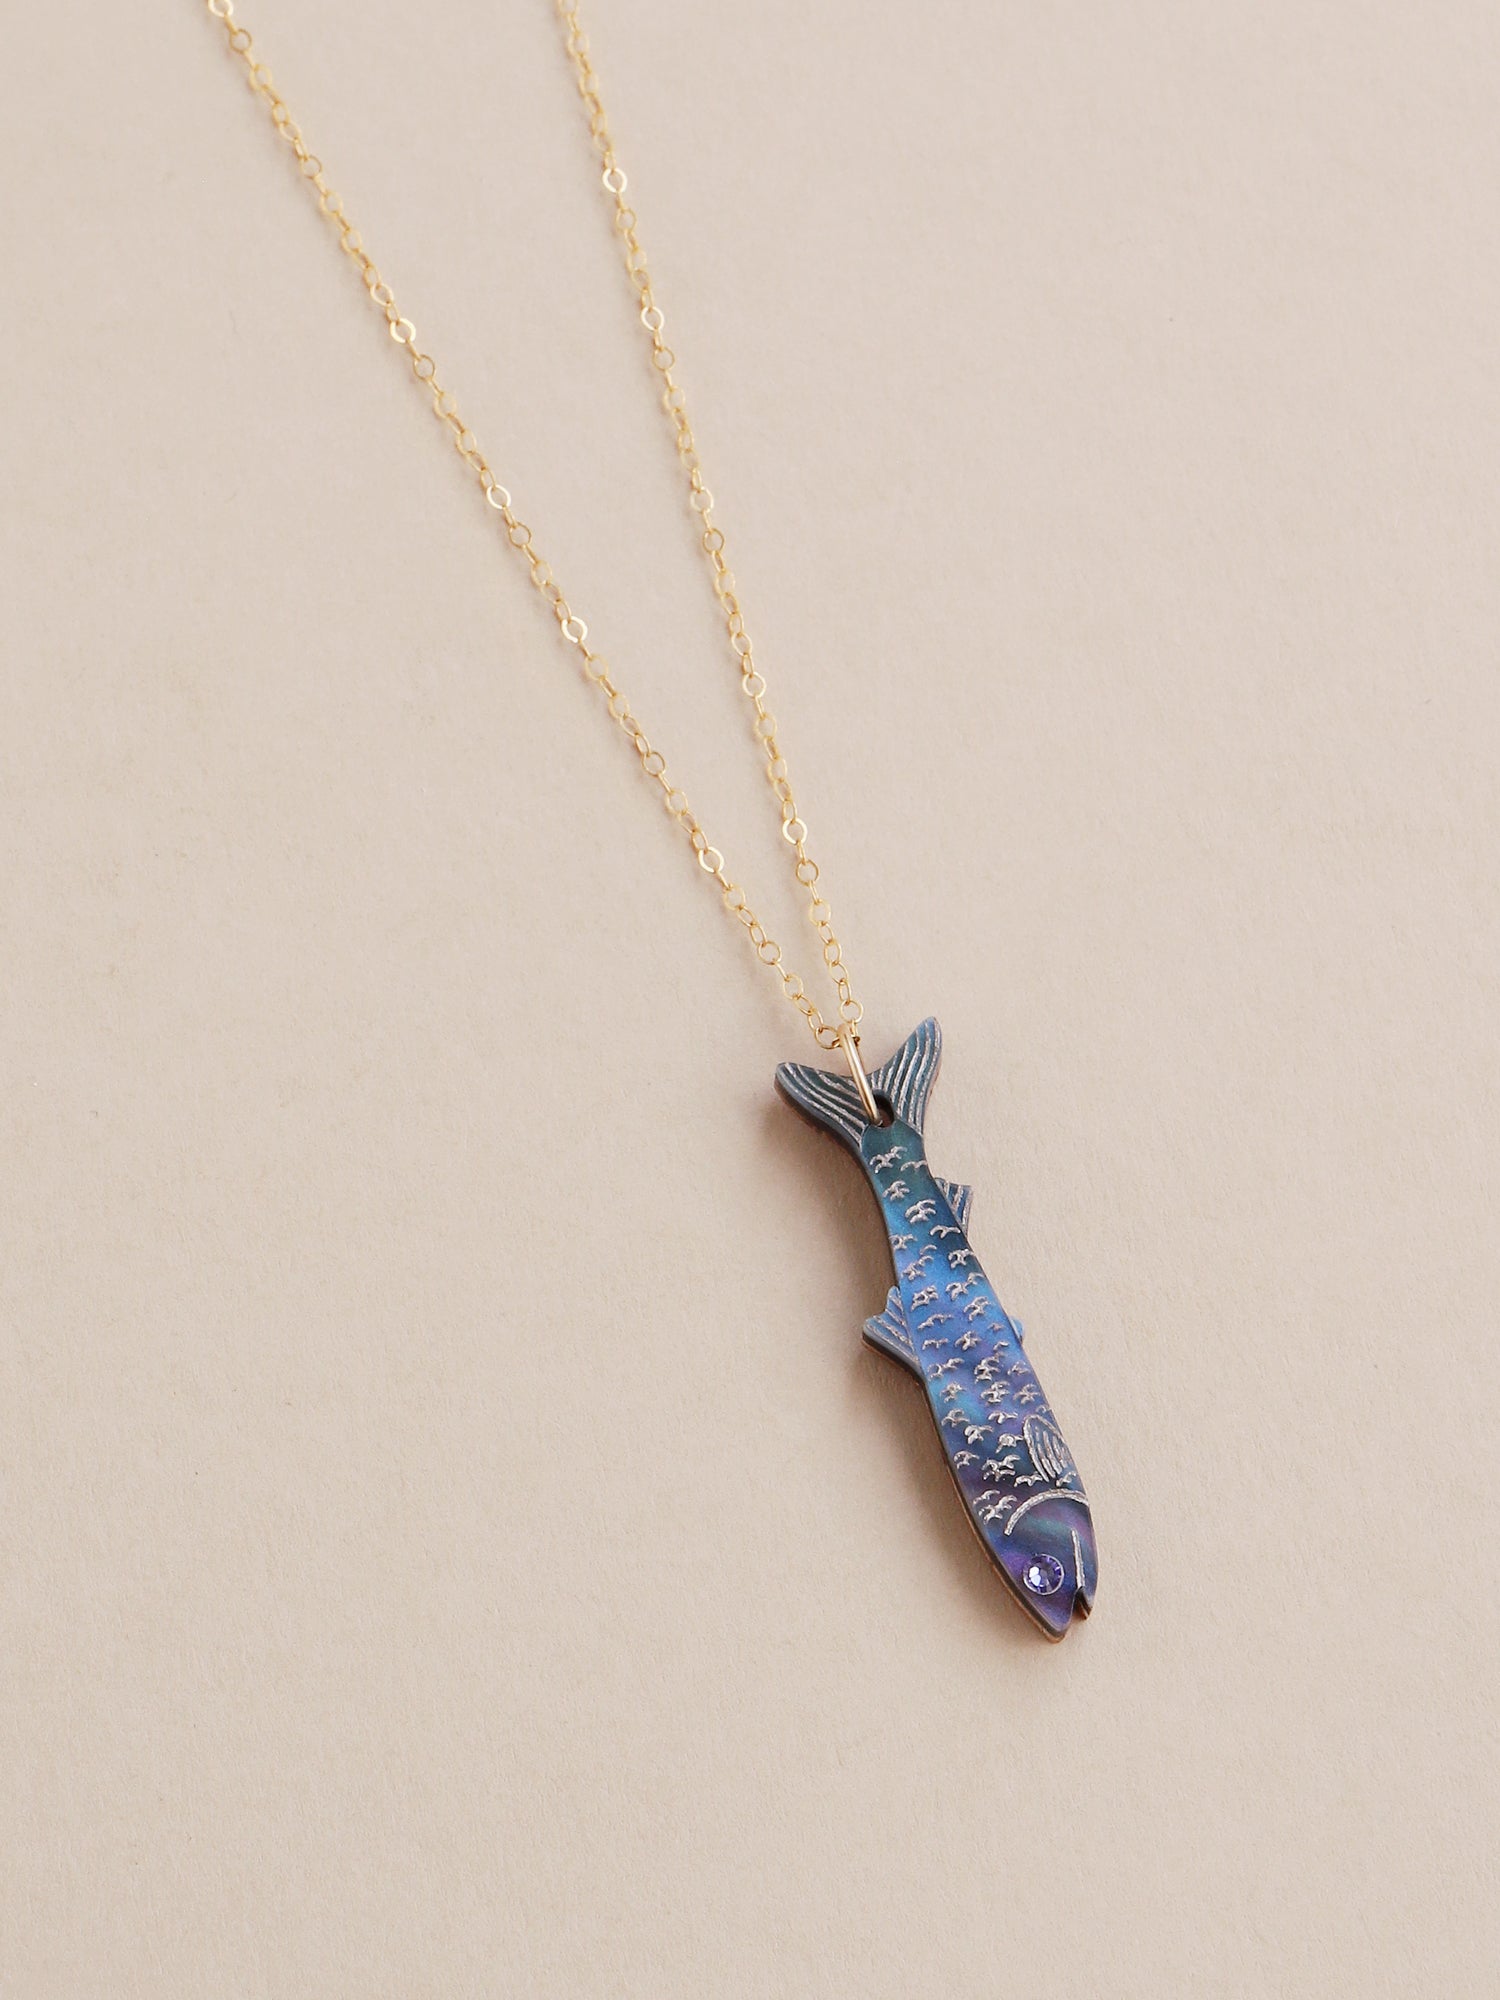 Anchovy Necklace